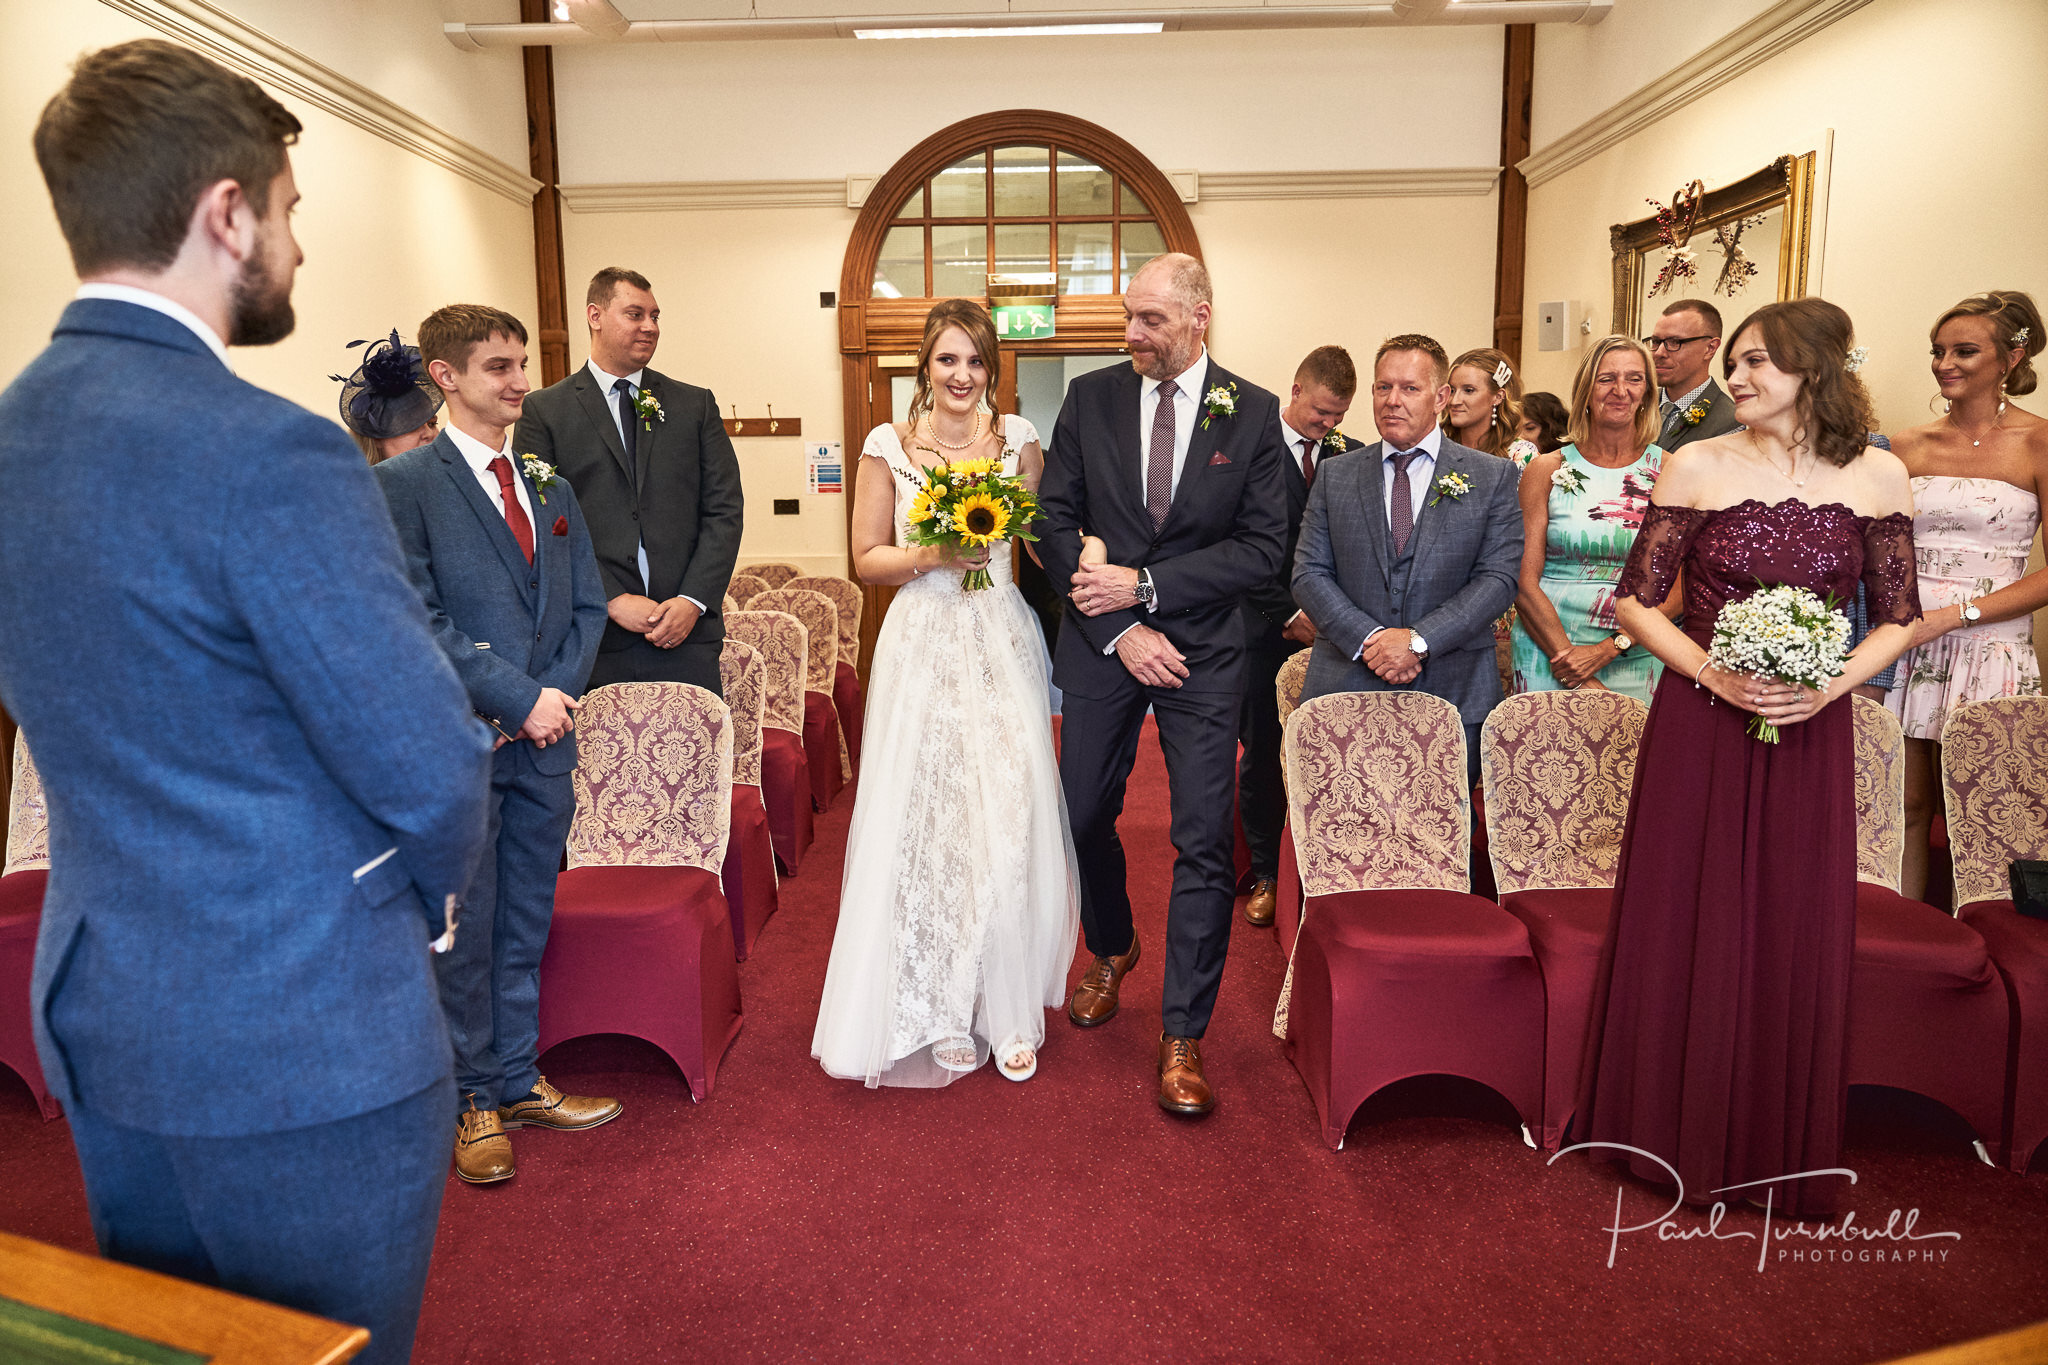 The Bride's Entrance. Wedding Photography at Sheffield Town Hall